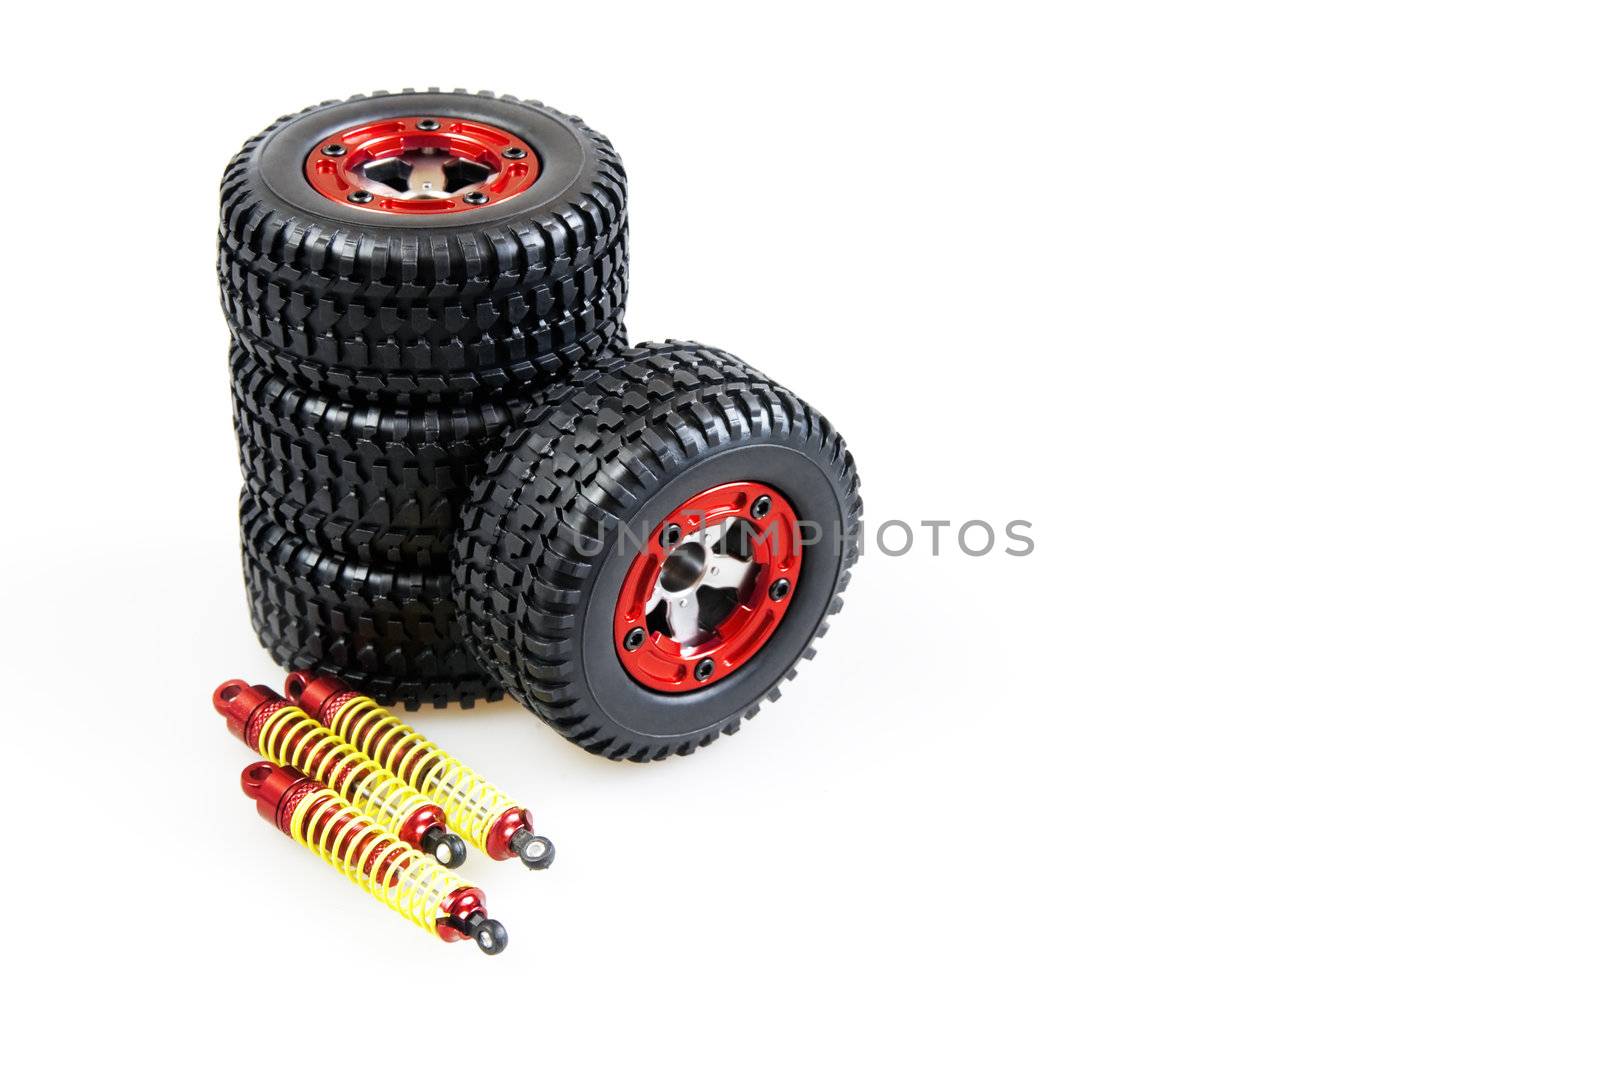 shock-absorbers and wheels of rc car on a white background